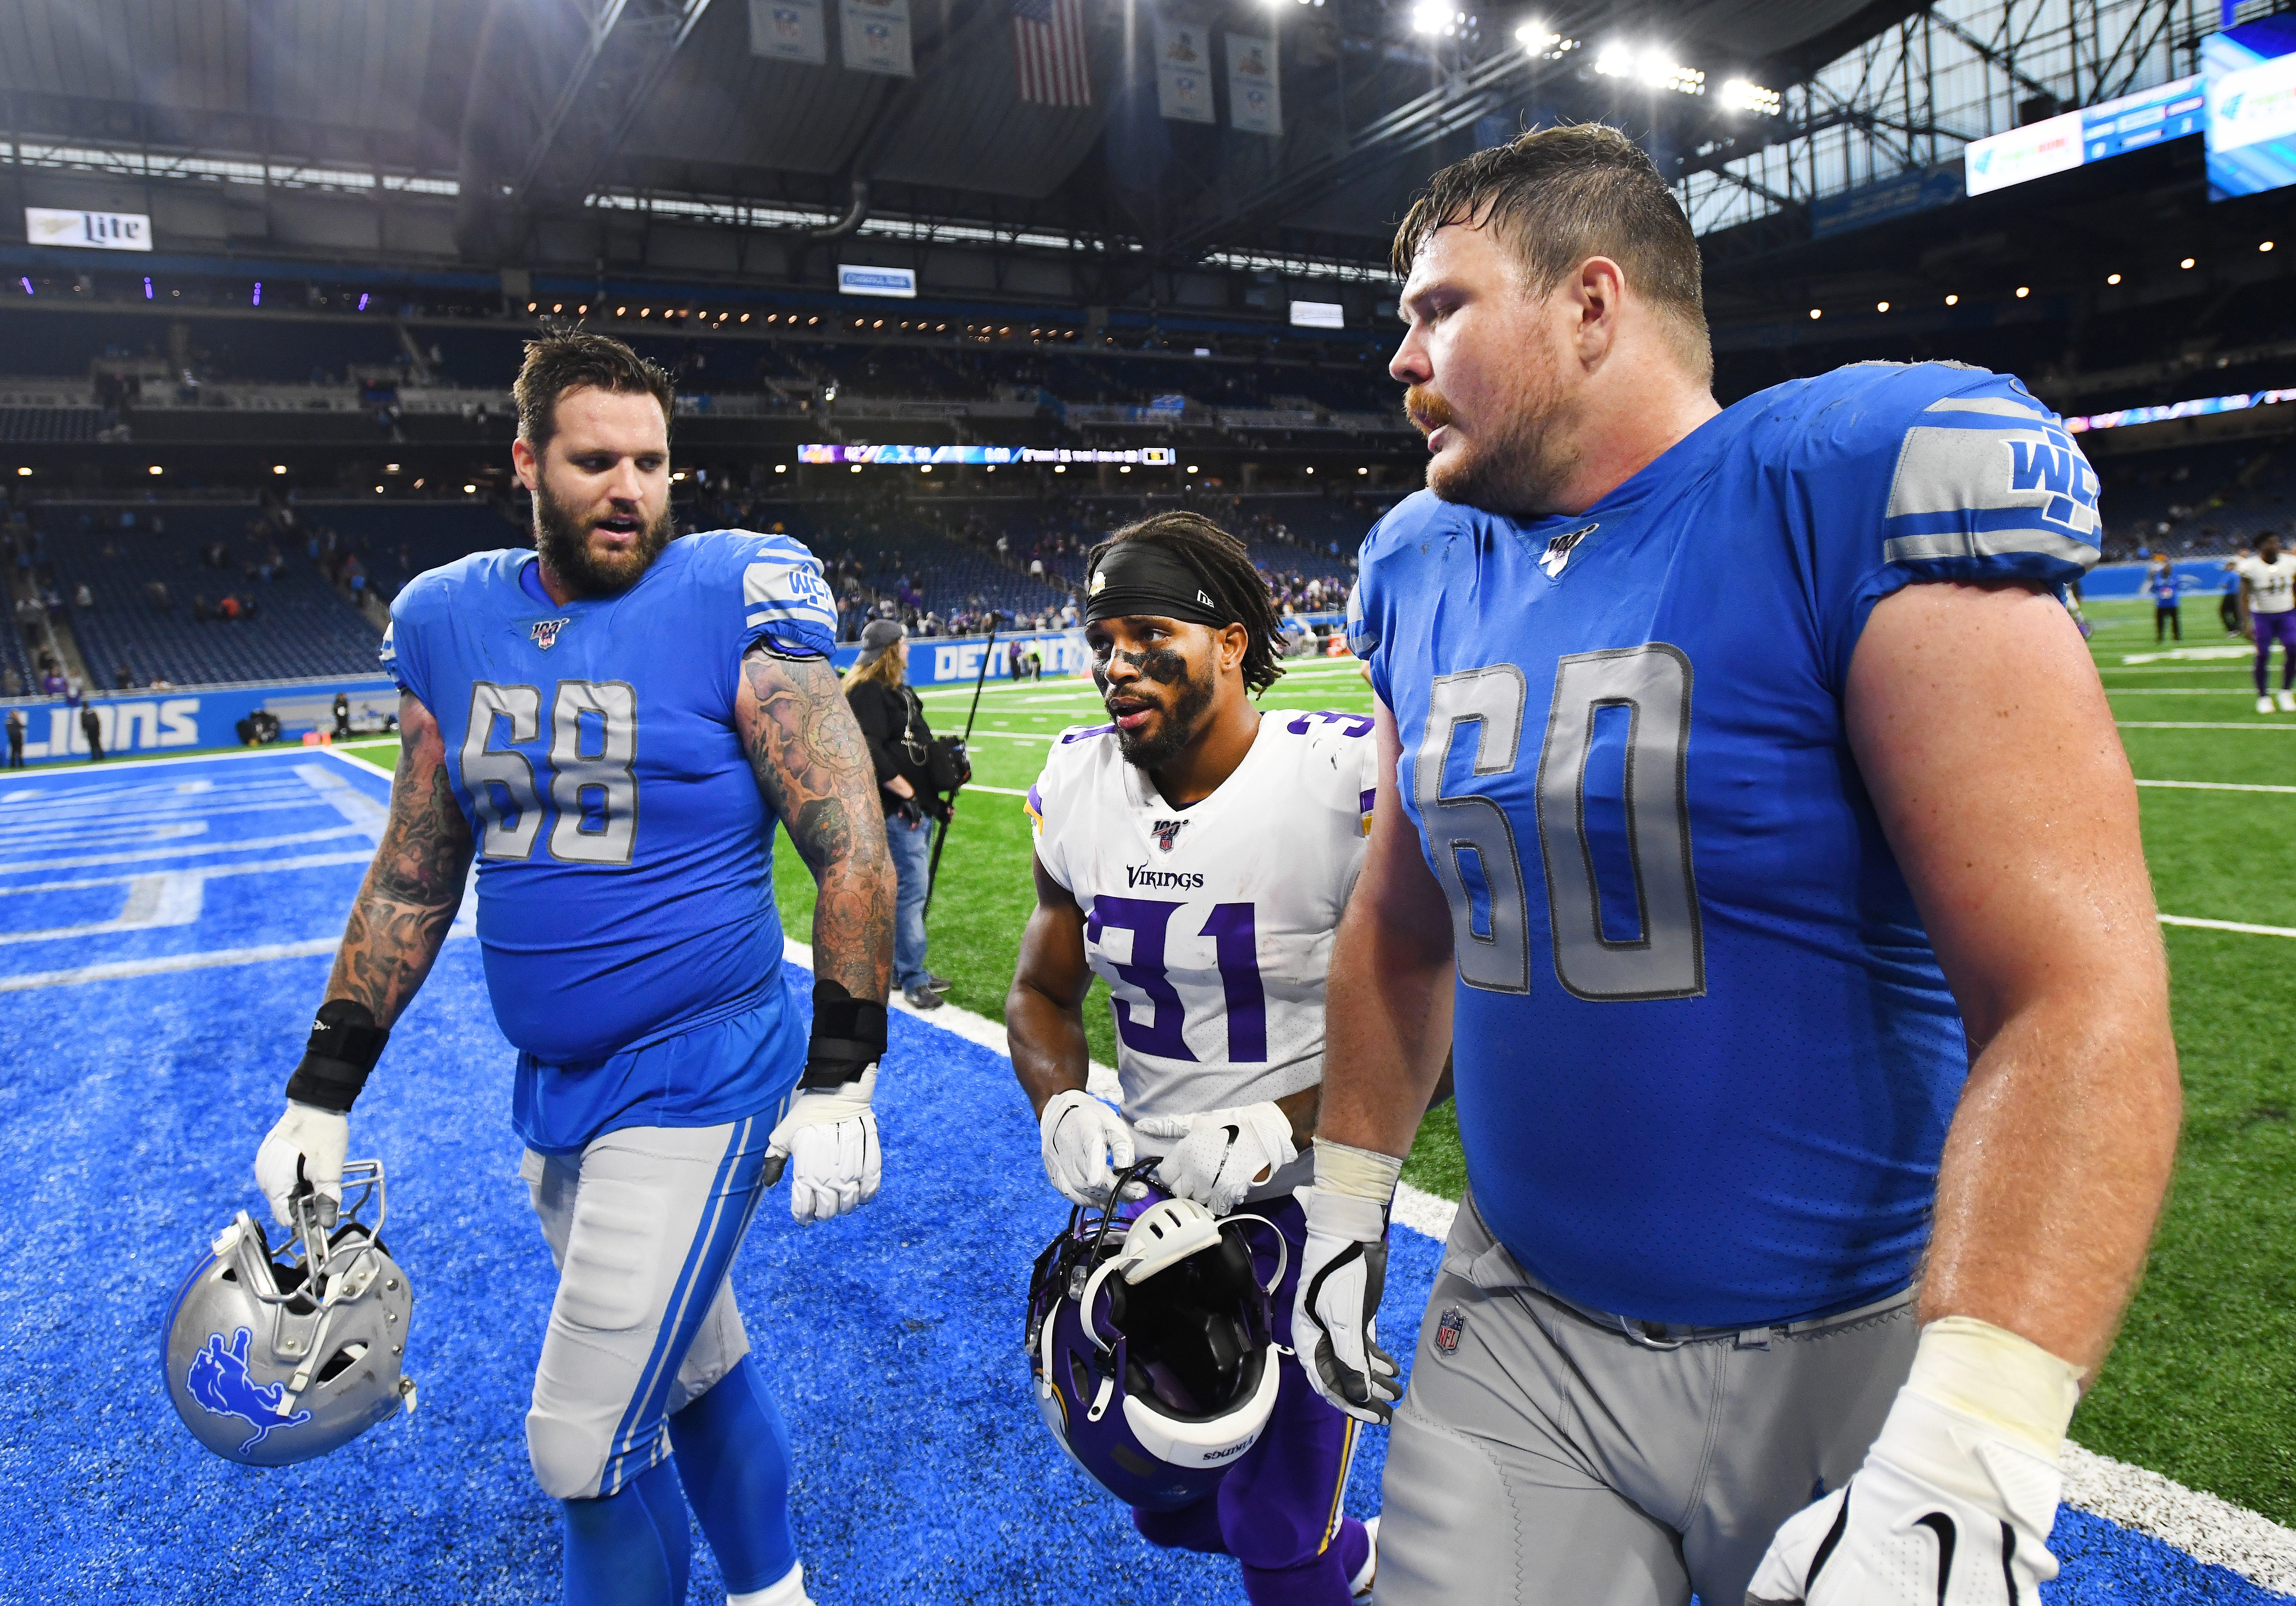 Lions ' Taylor Decker and Graham Glasgow walk with former Lion and Vikings special teams player Ameer Abdullah after the game.